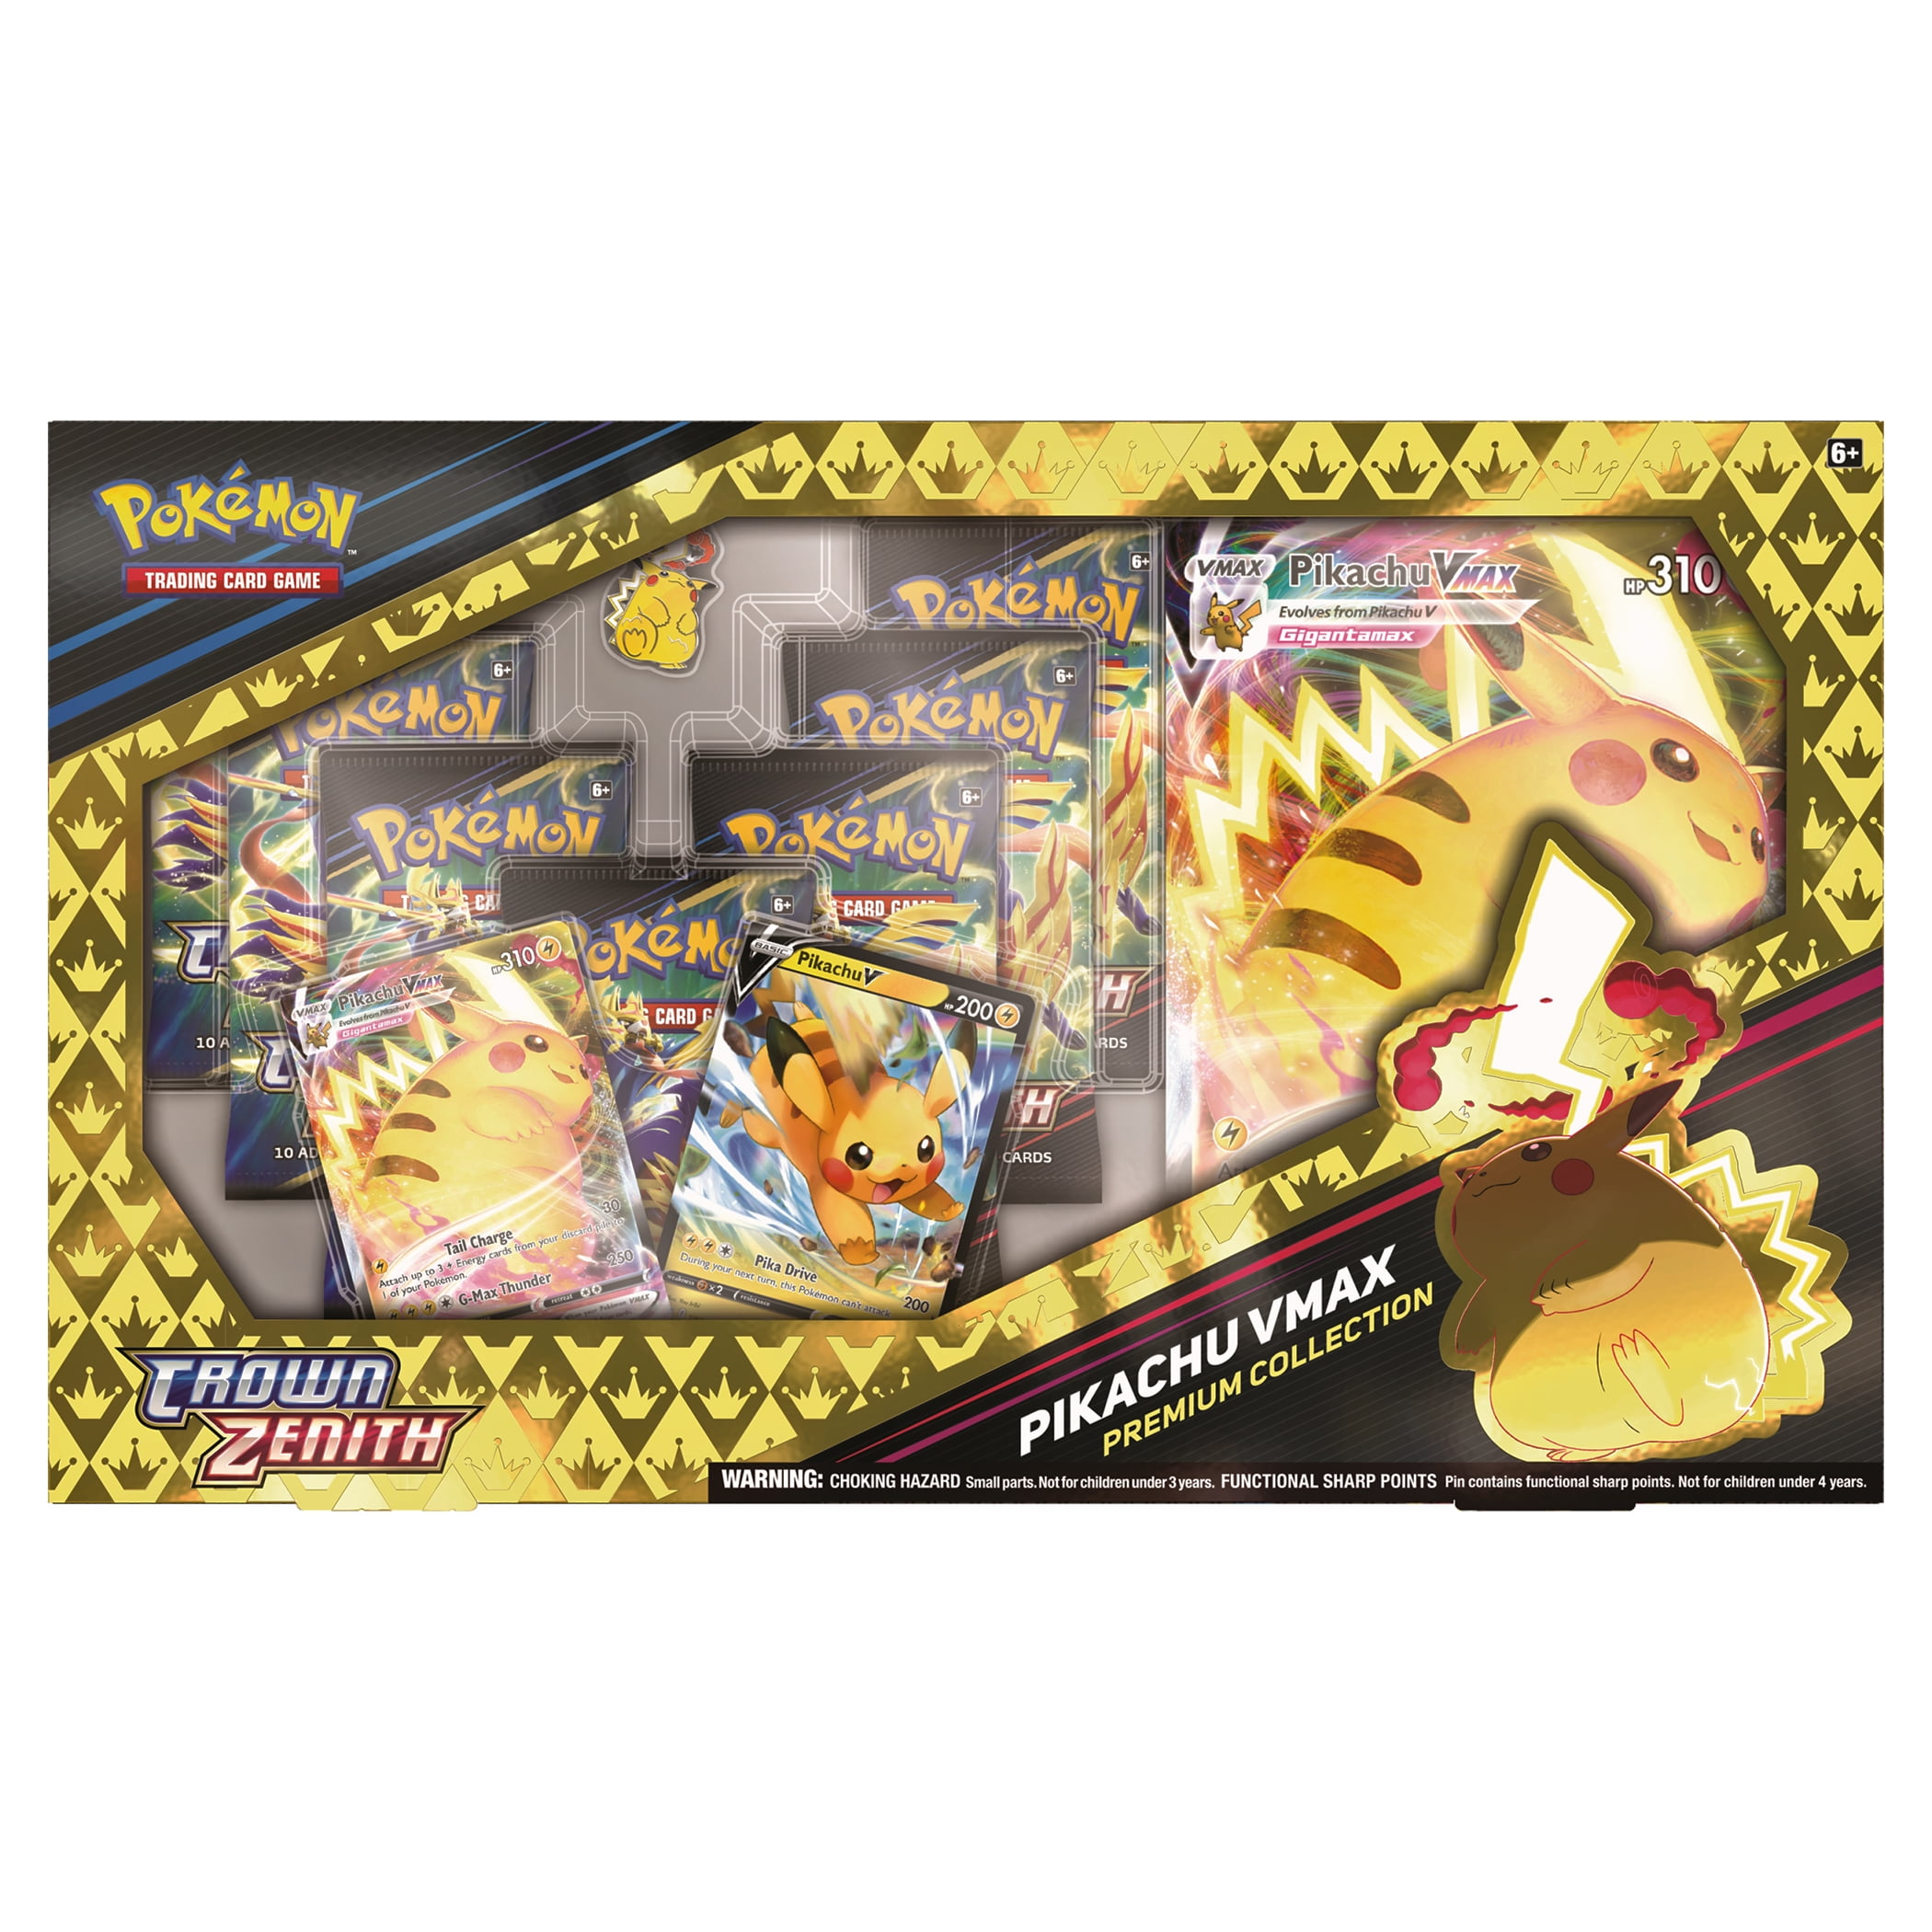 Pokemon Trading Card Games Crown Zenith Special Collection Pikachu Vmax - 7 Booster Packs Included